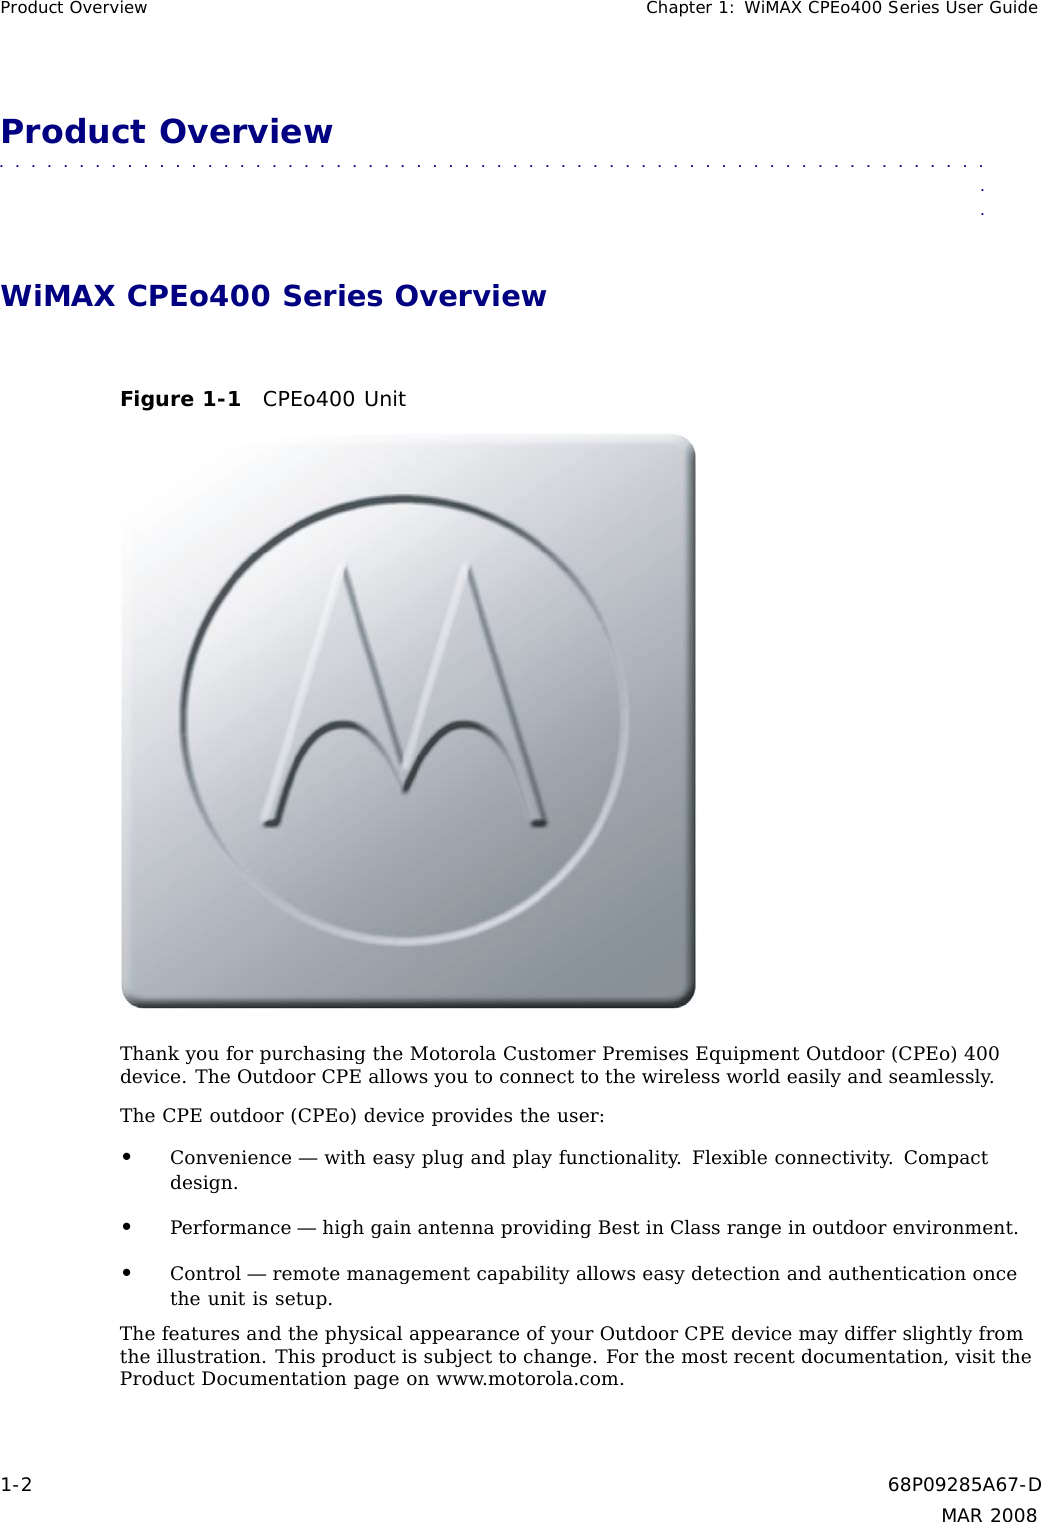 Product Overview Chapter 1: WiMAX CPEo400 Series User GuideProduct Overview■■■■■■■■■■■ ■■■■■■■■■■■■ ■■■■■■■■■■■■■ ■■■■■■■■■■■■■ ■■■■■■■■■■■■■■■WiMAX CPEo400 Series OverviewFigure 1-1 CPEo400 UnitThank you for purchasing the Motorola Customer Premises Equipment Outdoor (CPEo) 400device. The Outdoor CPE allows you to connect to the wireless world easily and seamlessly.The CPE outdoor (CPEo) device provides the user:•Convenience — with easy plug and play functionality. Flexible connectivity. Compactdesign.•Performance — high gain antenna providing Best in Class range in outdoor environment.•Control — remote management capability allows easy detection and authentication oncethe unit is setup.The features and the physical appearance of your Outdoor CPE device may differ slightly fromthe illustration. This product is subject to change. For the most recent documentation, visit theProduct Documentation page on www.motorola.com.1-2 68P09285A67-DMAR 2008